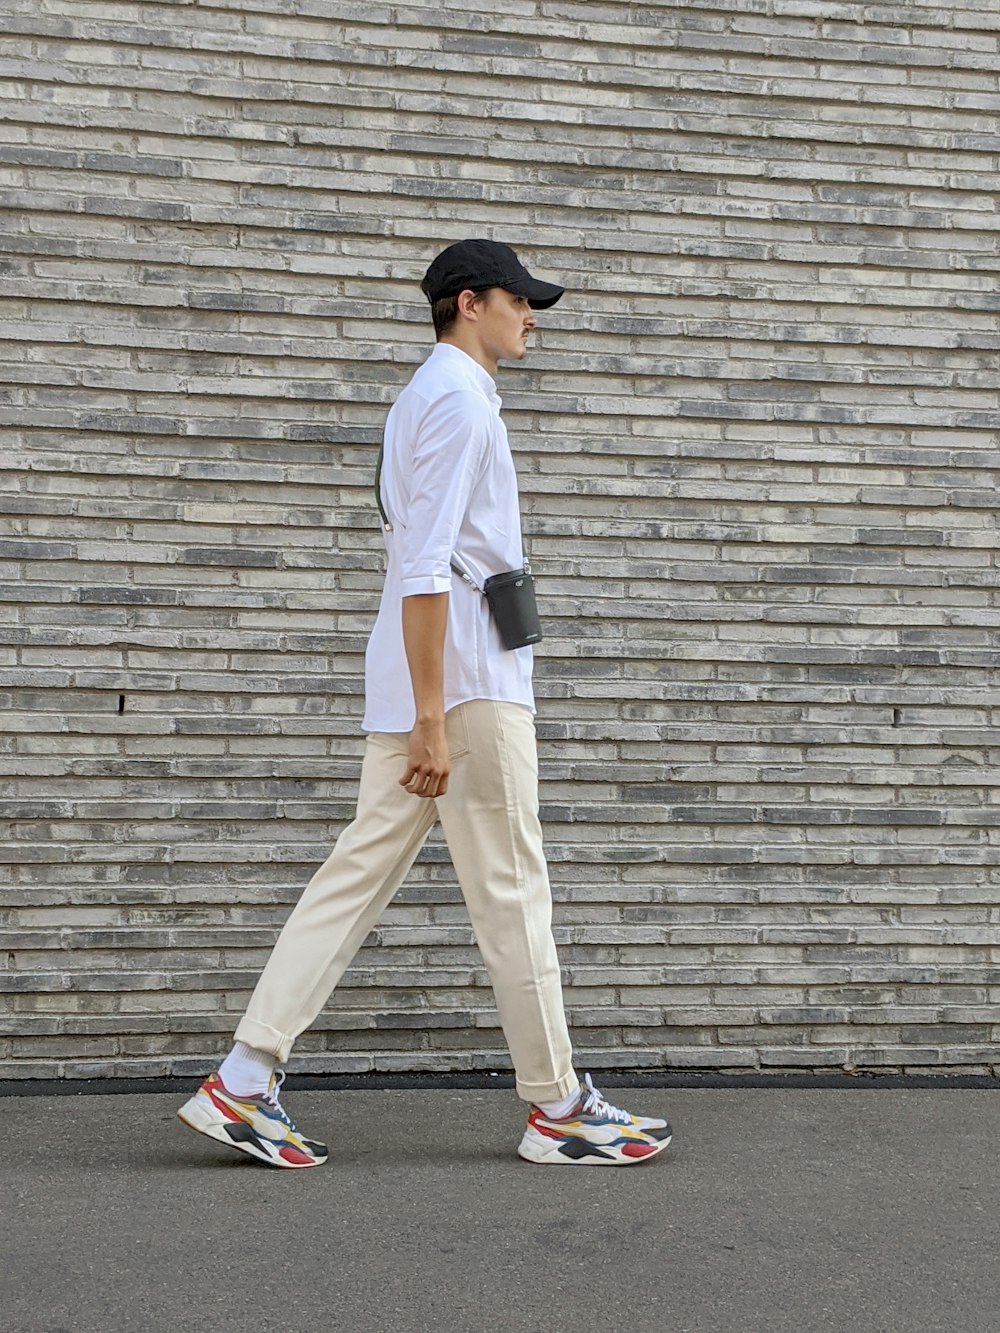 man in white t-shirt and beige pants standing on gray concrete floor